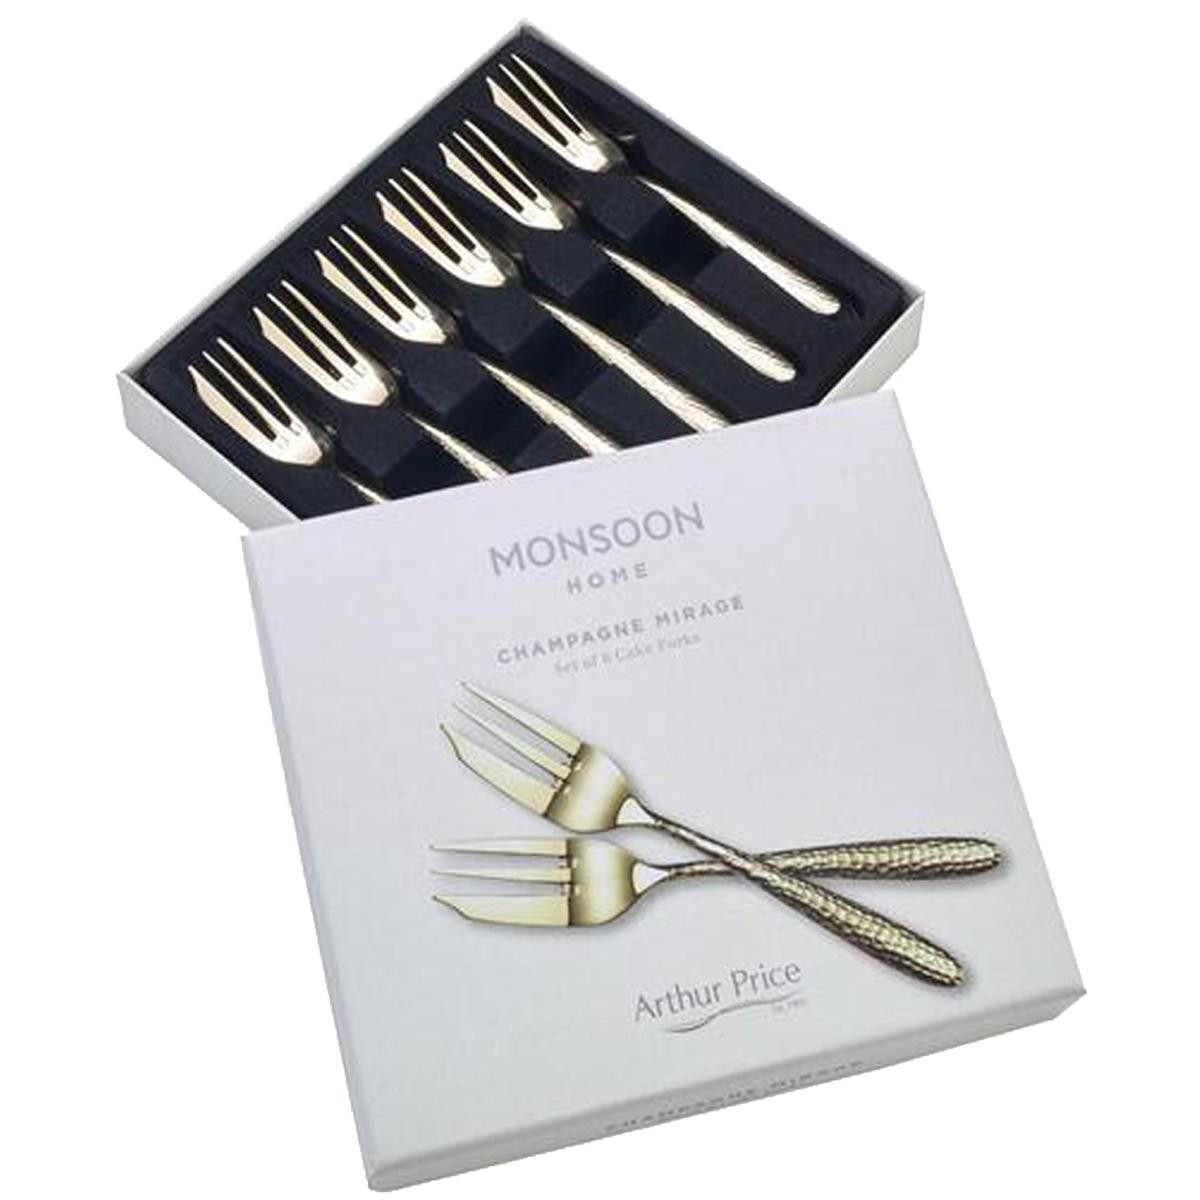 Image of Arthur Price Monsoon Champagne Mirage Pastry Fork Set